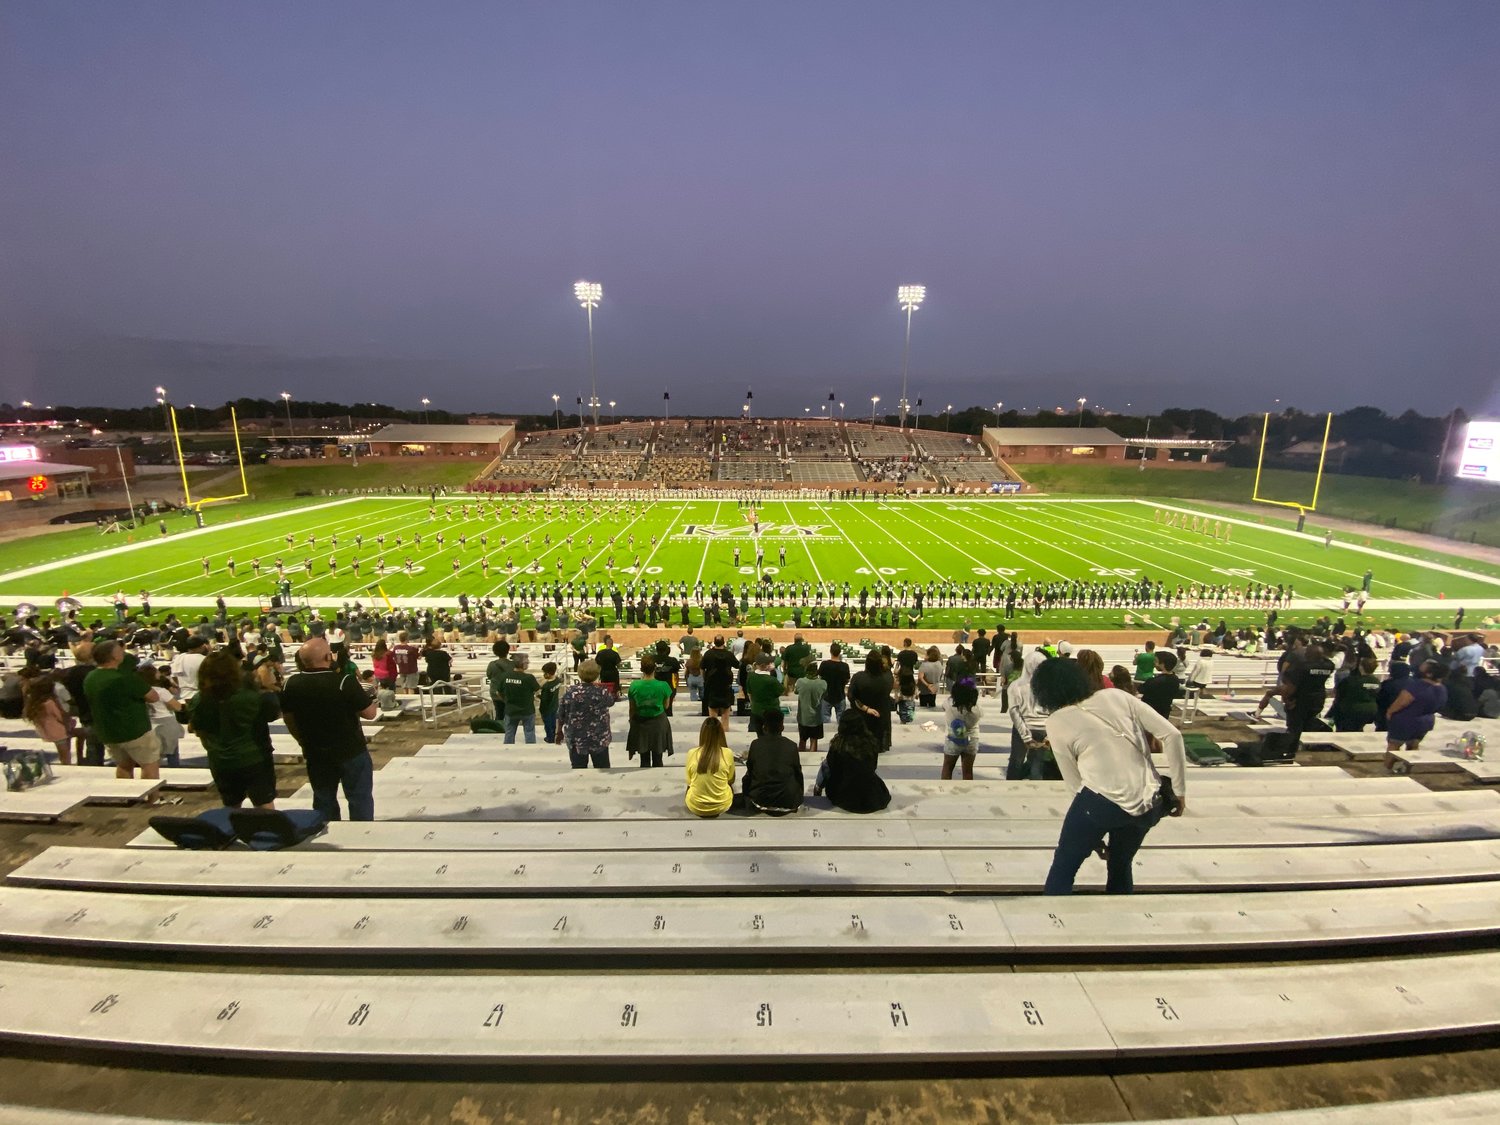 Katy ISD football games are only allowed to be at half-capacity due to COVID-19 regulations.